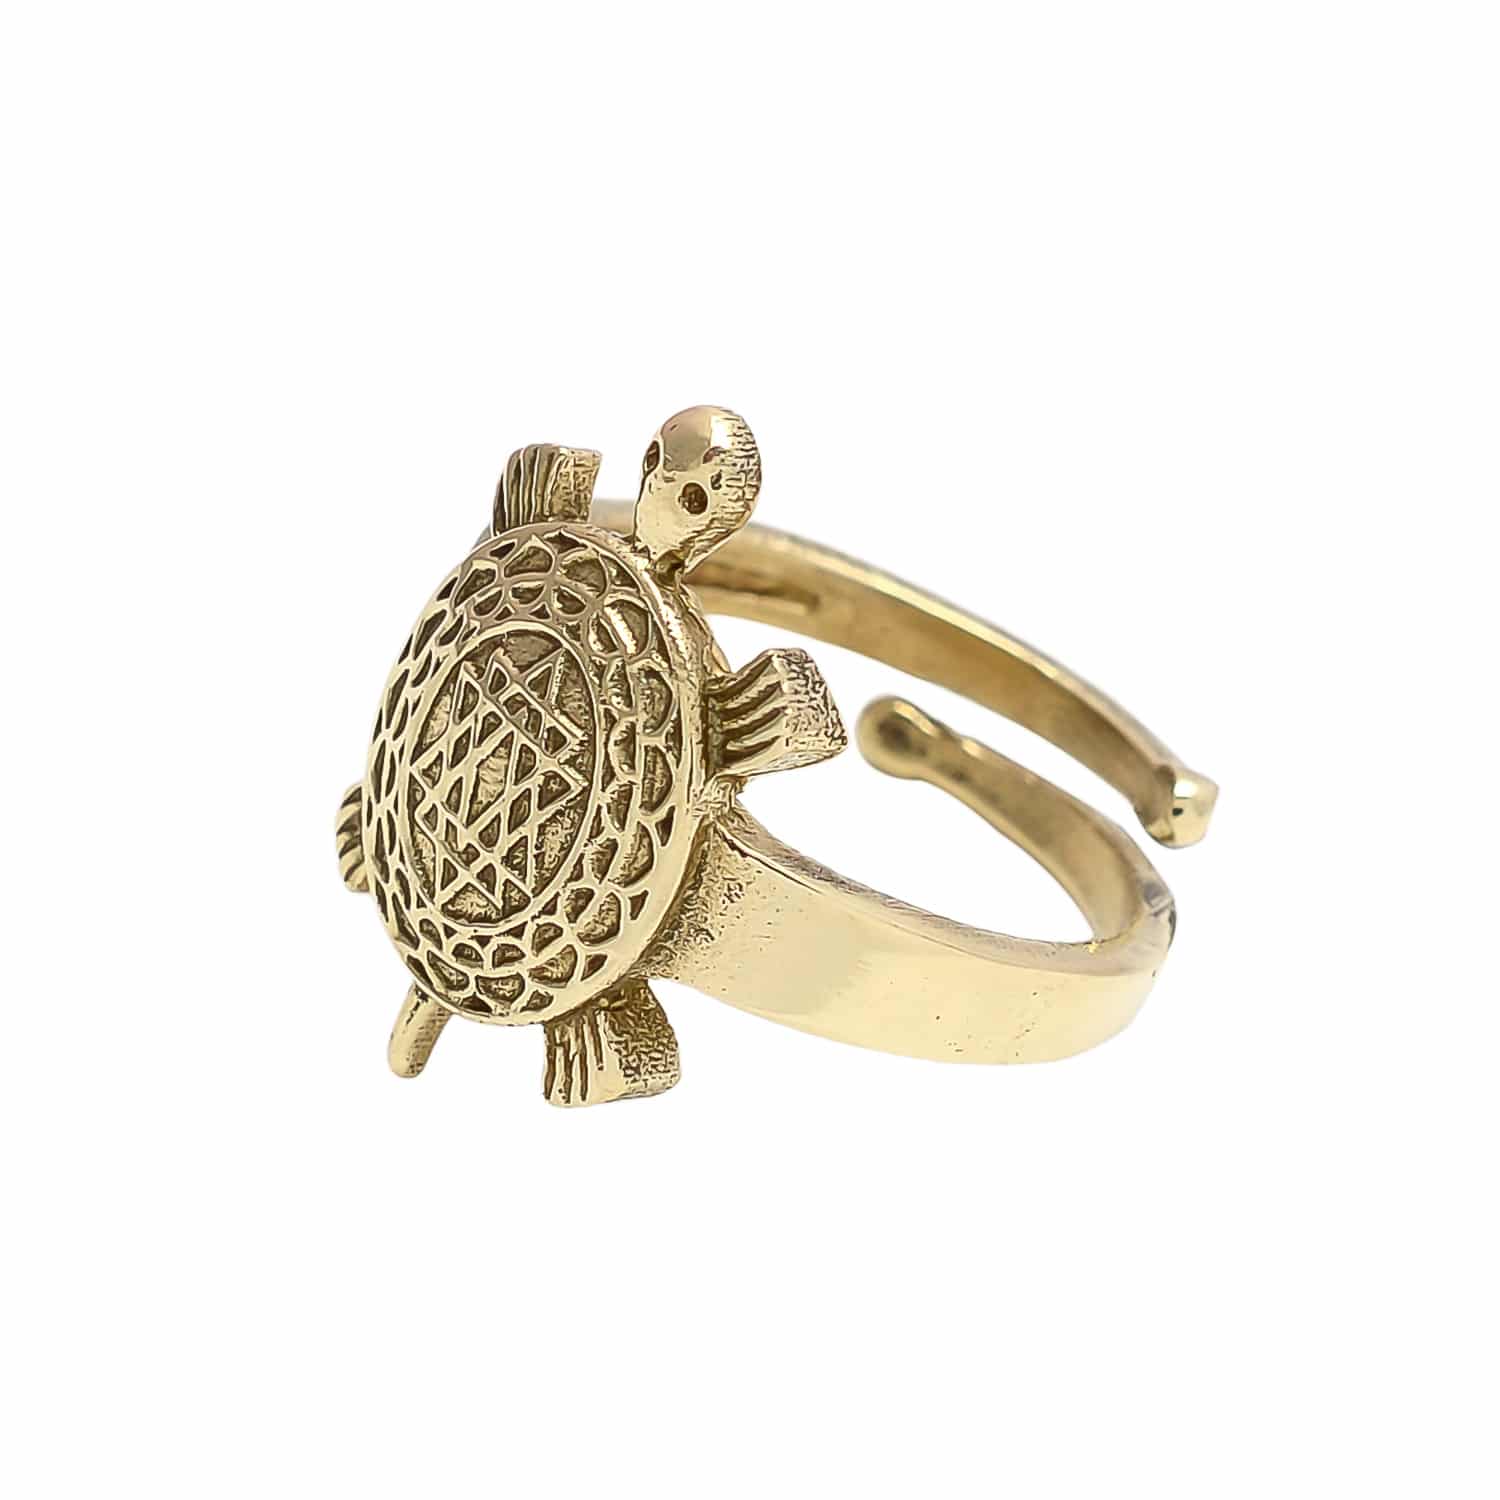 Sri Yantra Ring, Lotus Flower Ring, Meditation Ring, Fortune Charm,  Material Wealth Mantra, Tantra Jewelry for Woman, Sacred Geometry Ring -  Etsy | Sacred geometry ring, Lotus flower ring, Vedic jewelry